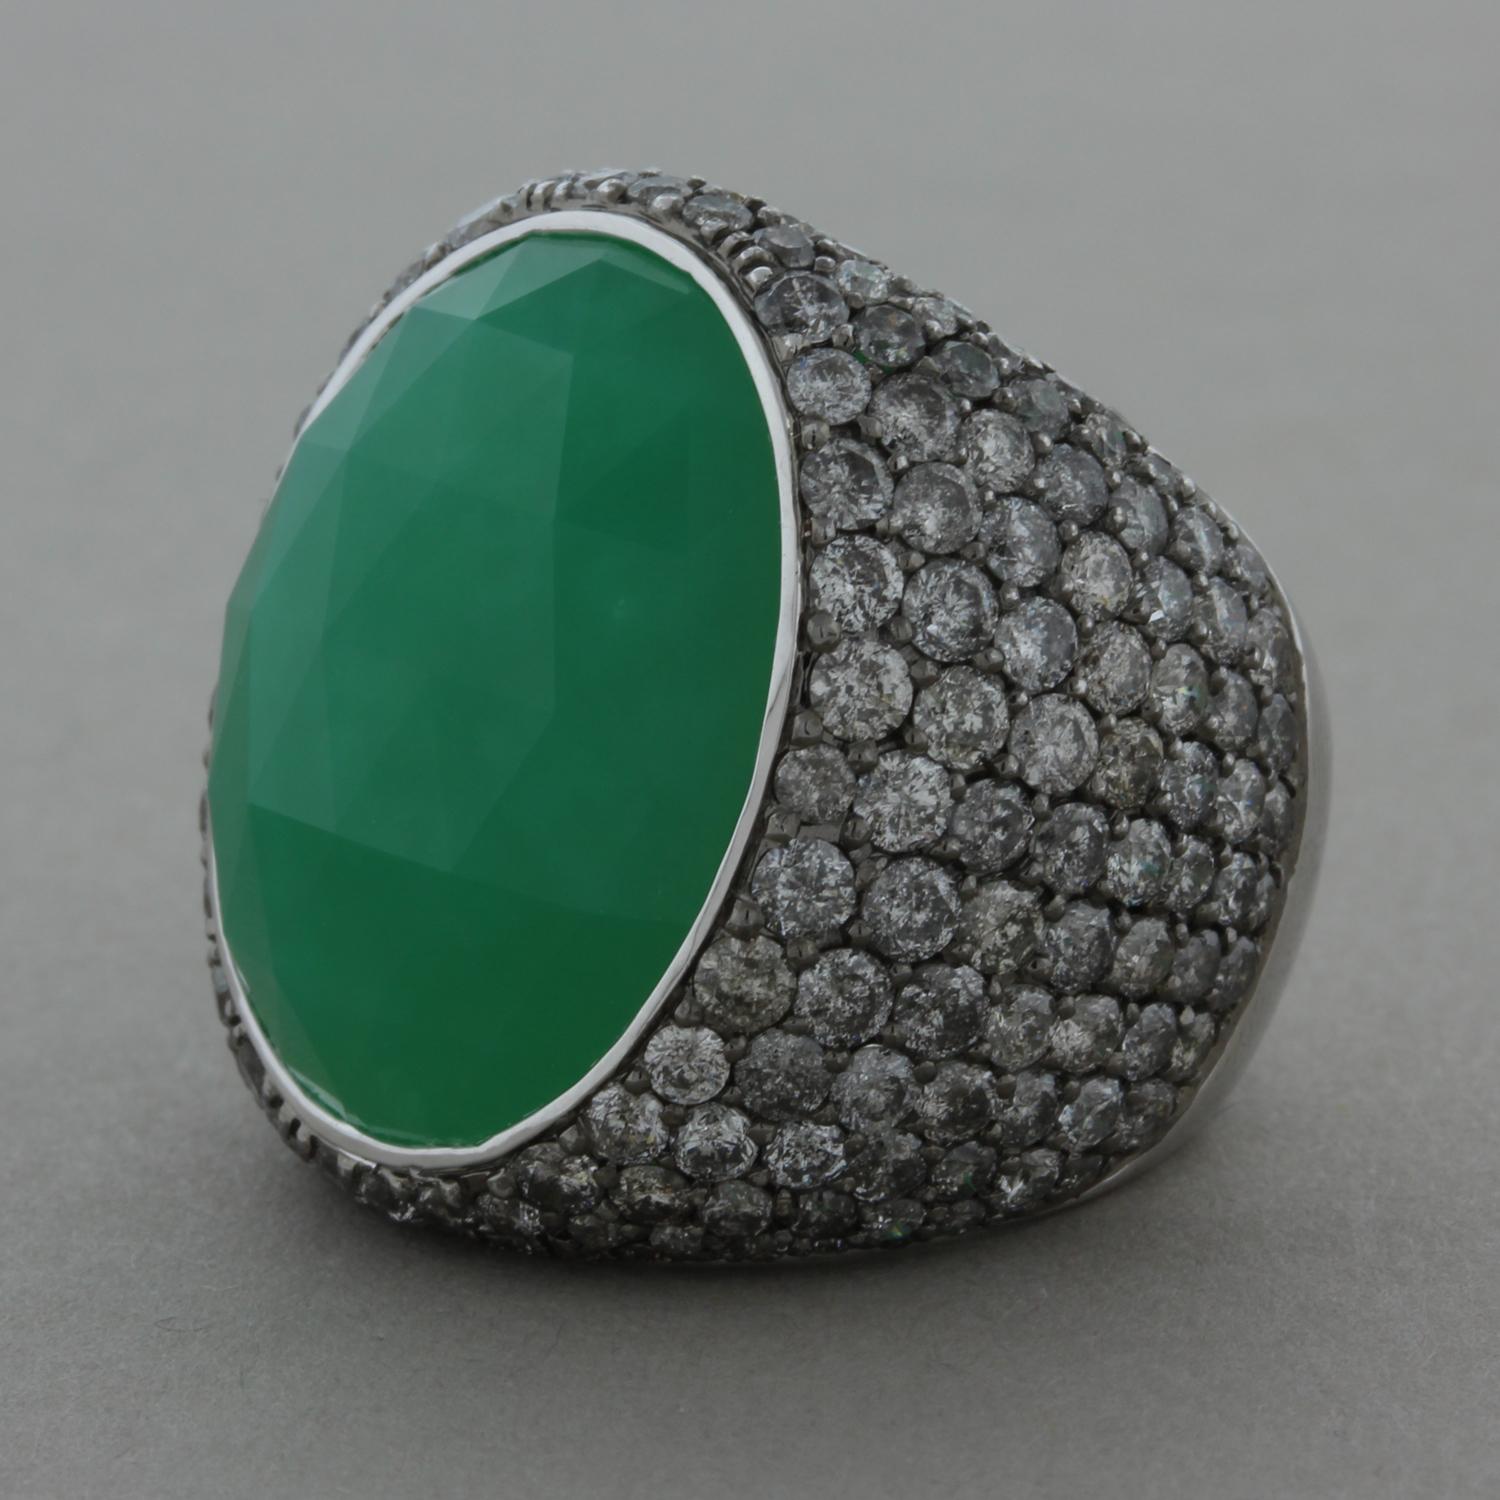 This exquisite cocktail ring features an faceted cabochon apple green chrysoprase. It is surrounded by 6.42 carats of pave set diamonds in an 18K white gold setting.

Ring Size 6.5 (Sizable)
